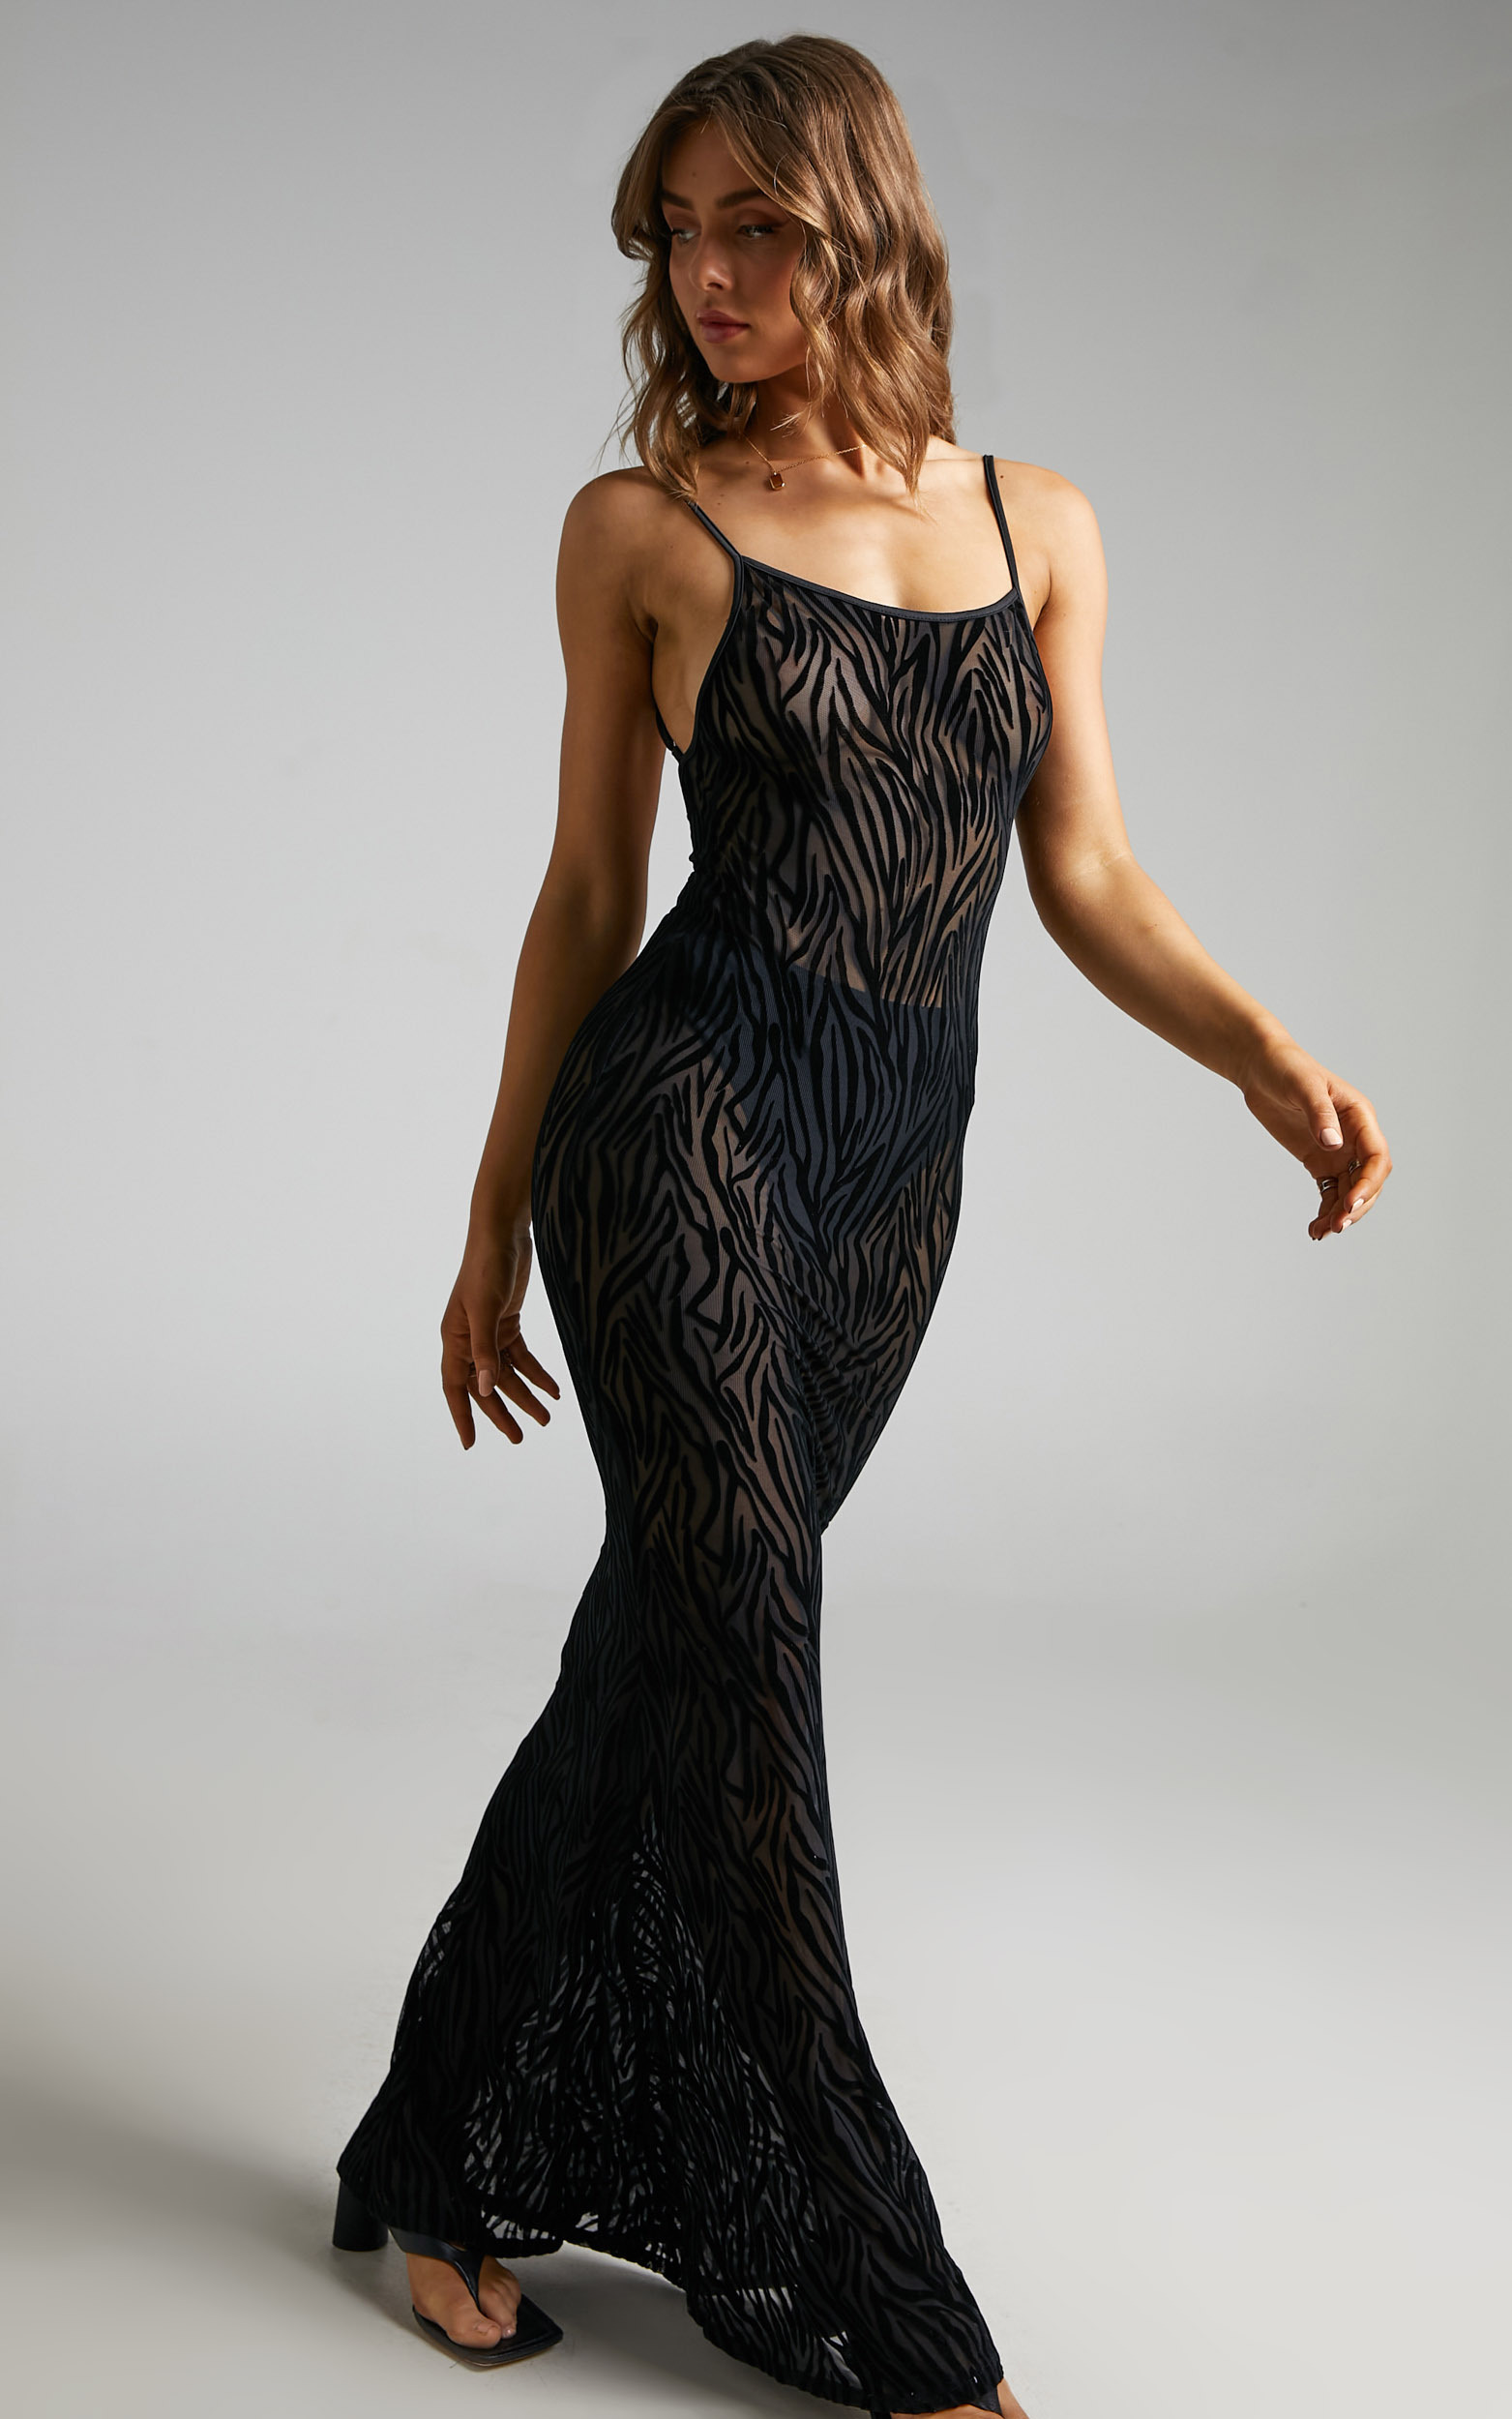 Theia Backless Mermaid Maxi Dress in Black Zebra - 06, BLK1, hi-res image number null